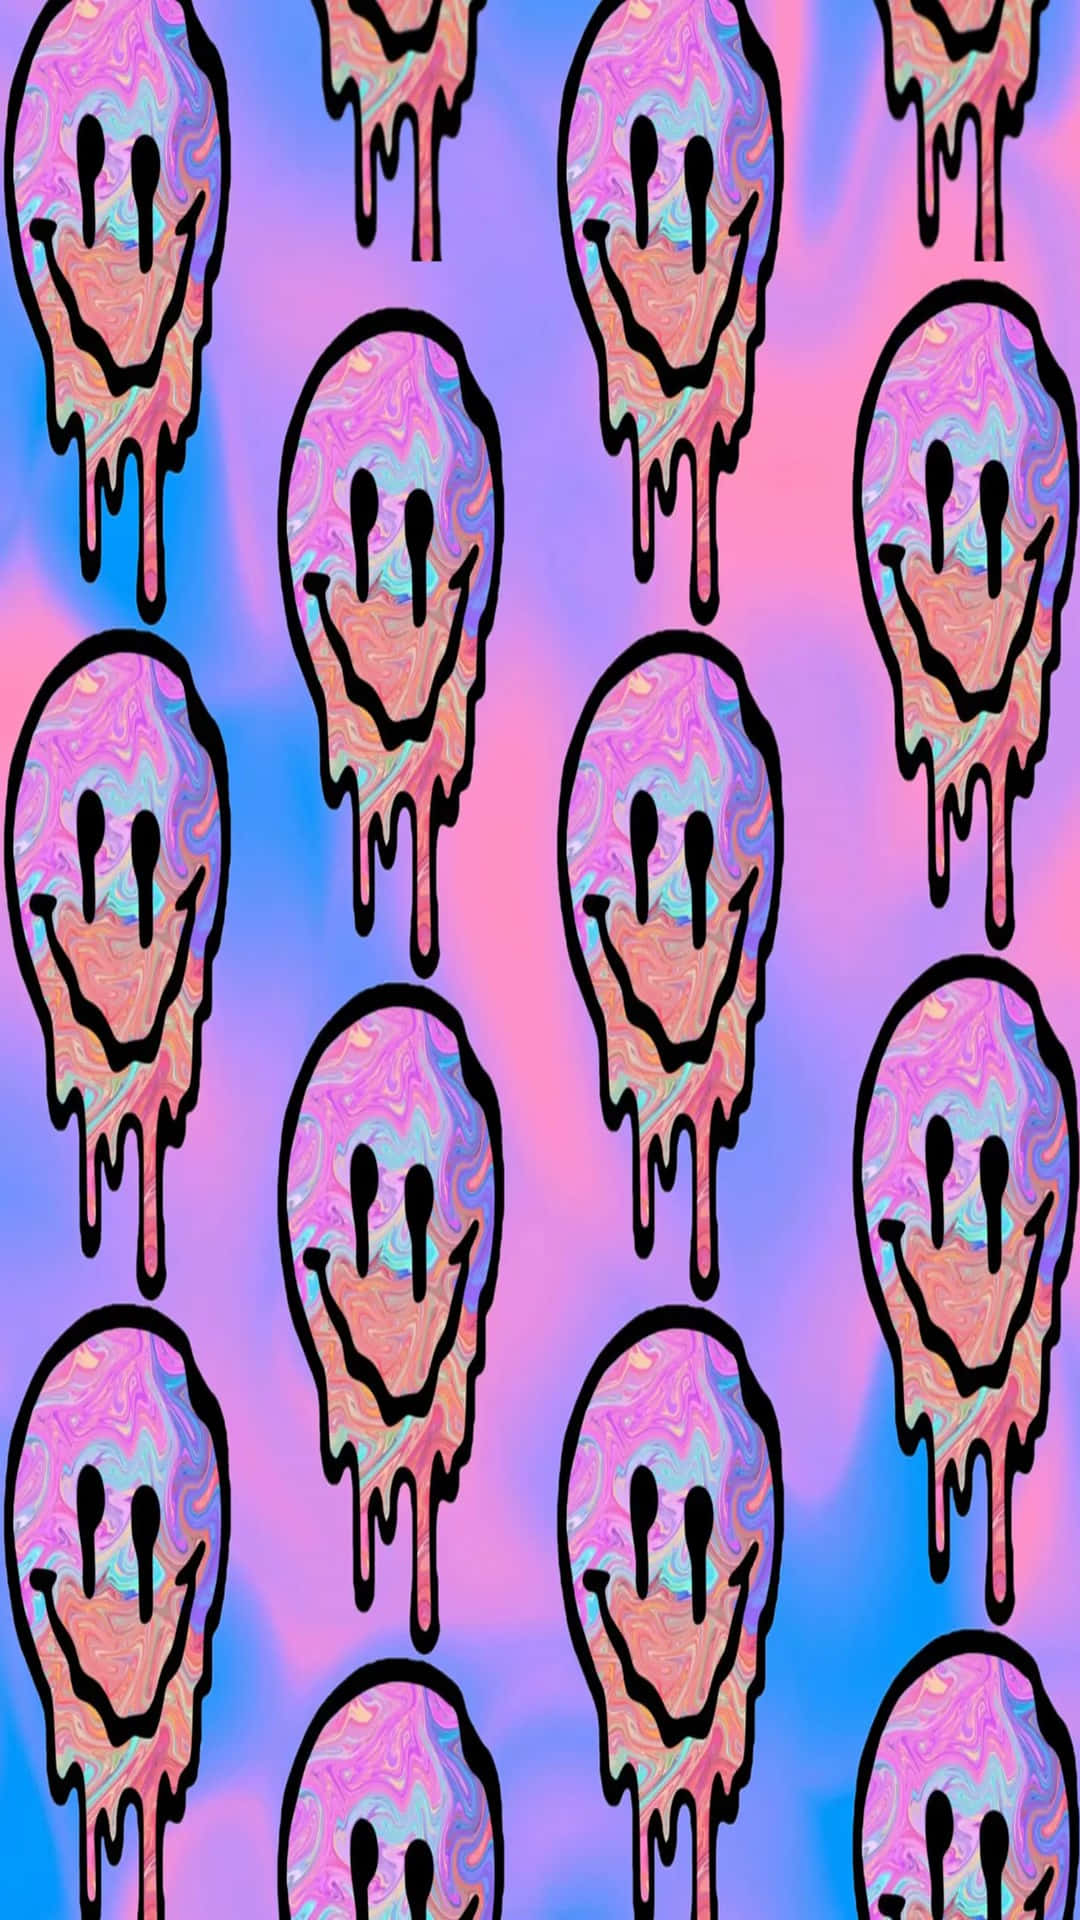 Psychedelic_ Dripping_ Smiley_ Faces_ Pattern Wallpaper